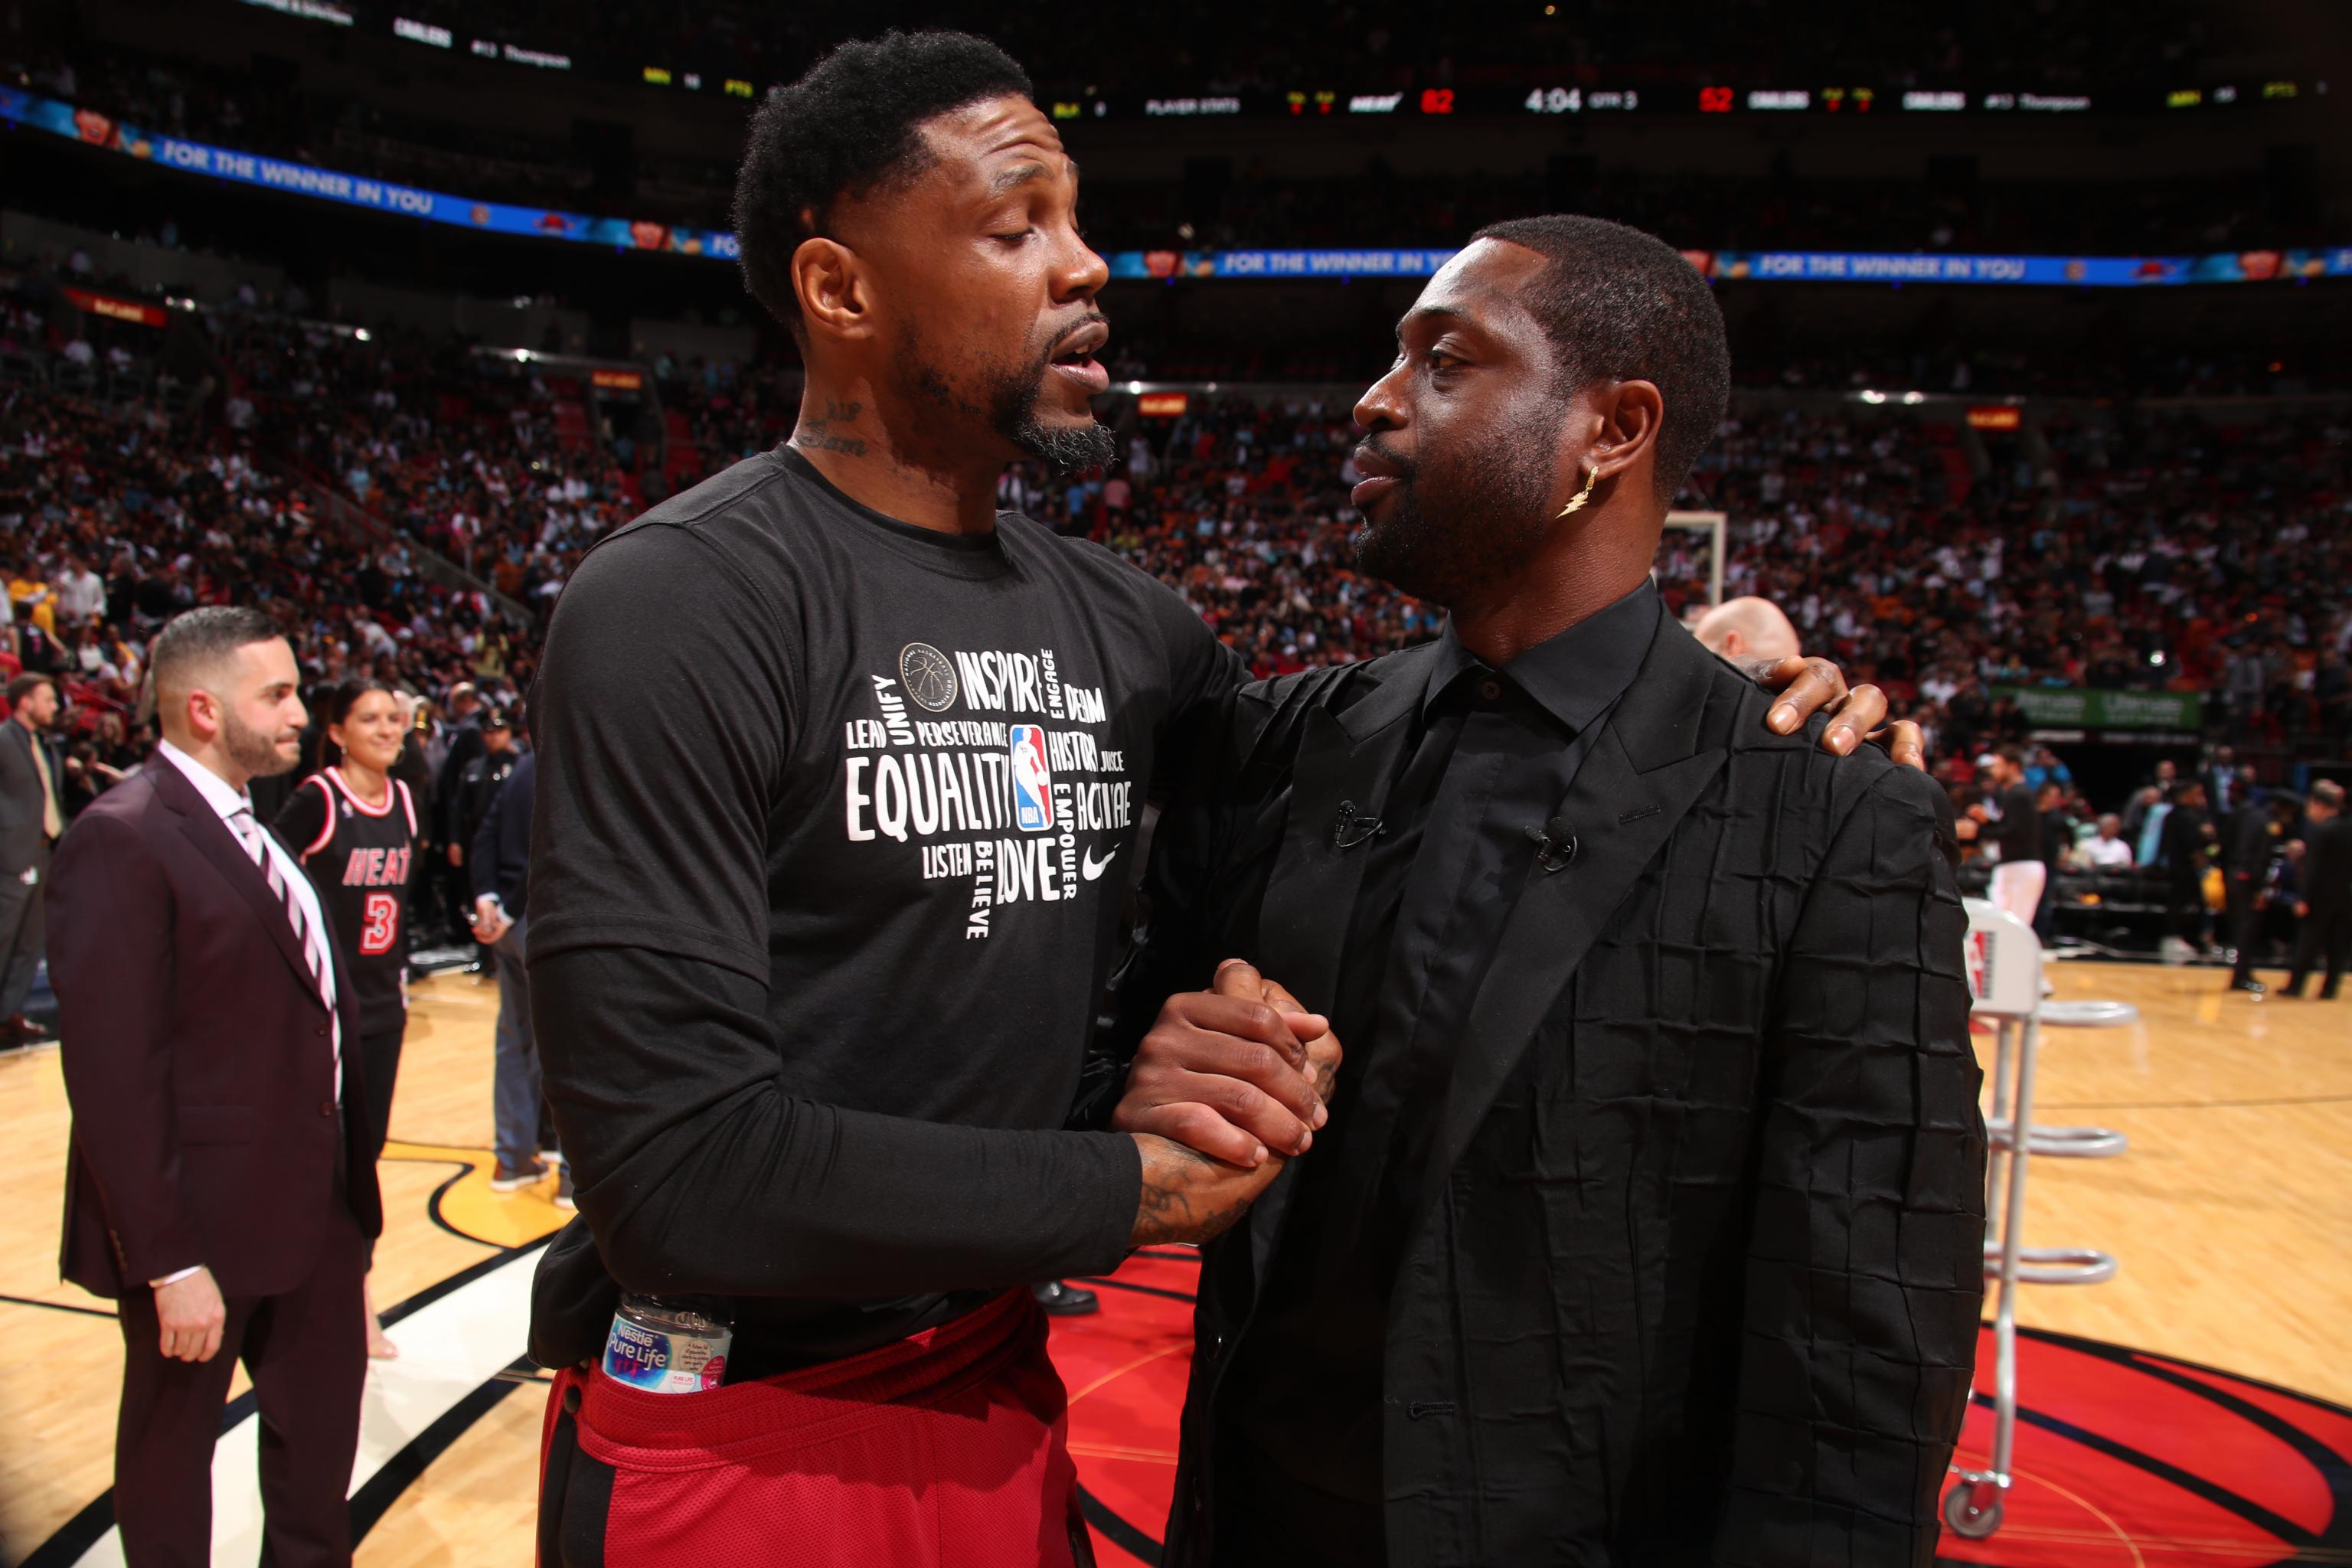 Heat S Udonis Haslem Says He S Undecided About Retirement Ahead Of 18th Season Bleacher Report Latest News Videos And Highlights